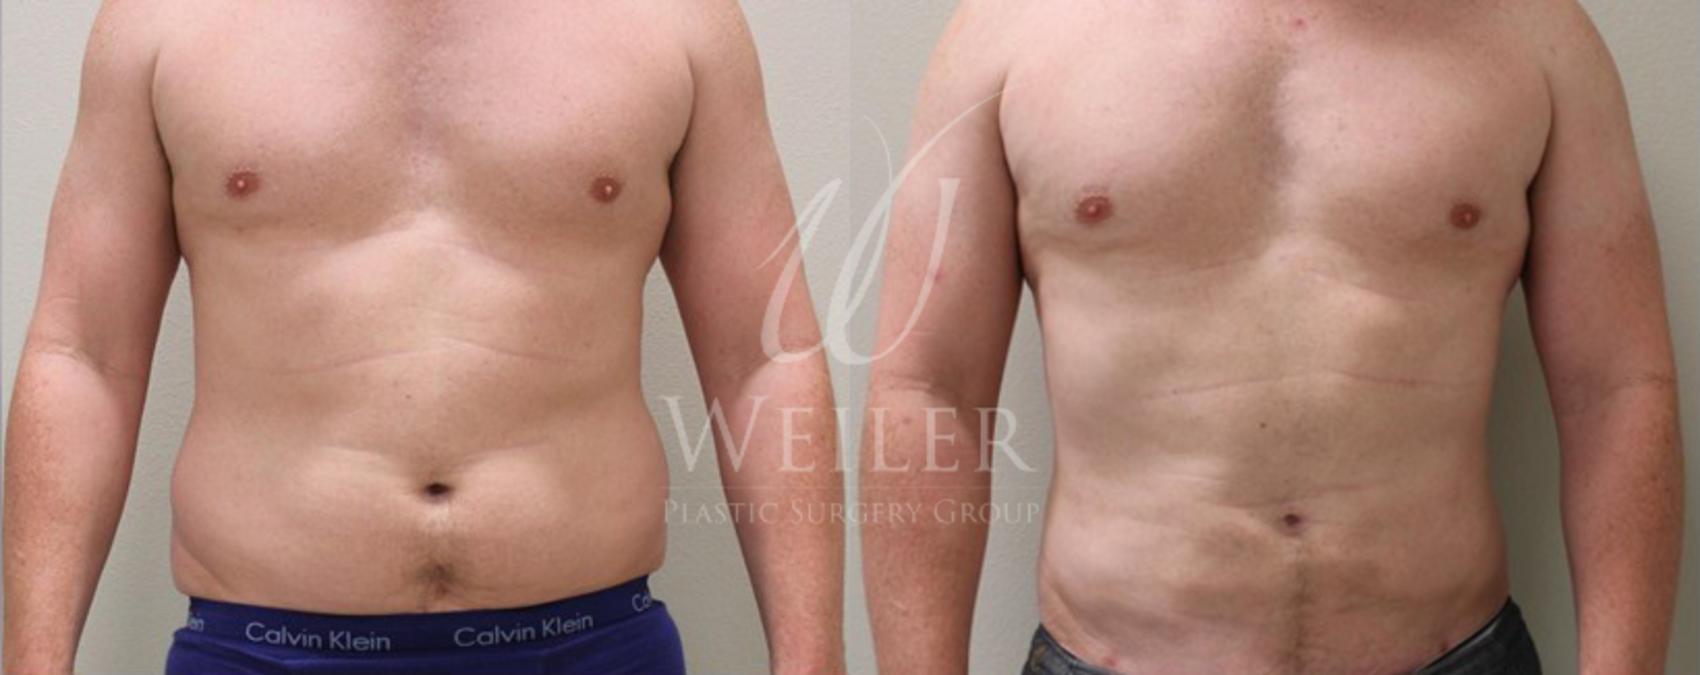 Liposuction Before and After Pictures Case 59 | Baton Rouge, Louisiana |  Weiler Plastic Surgery